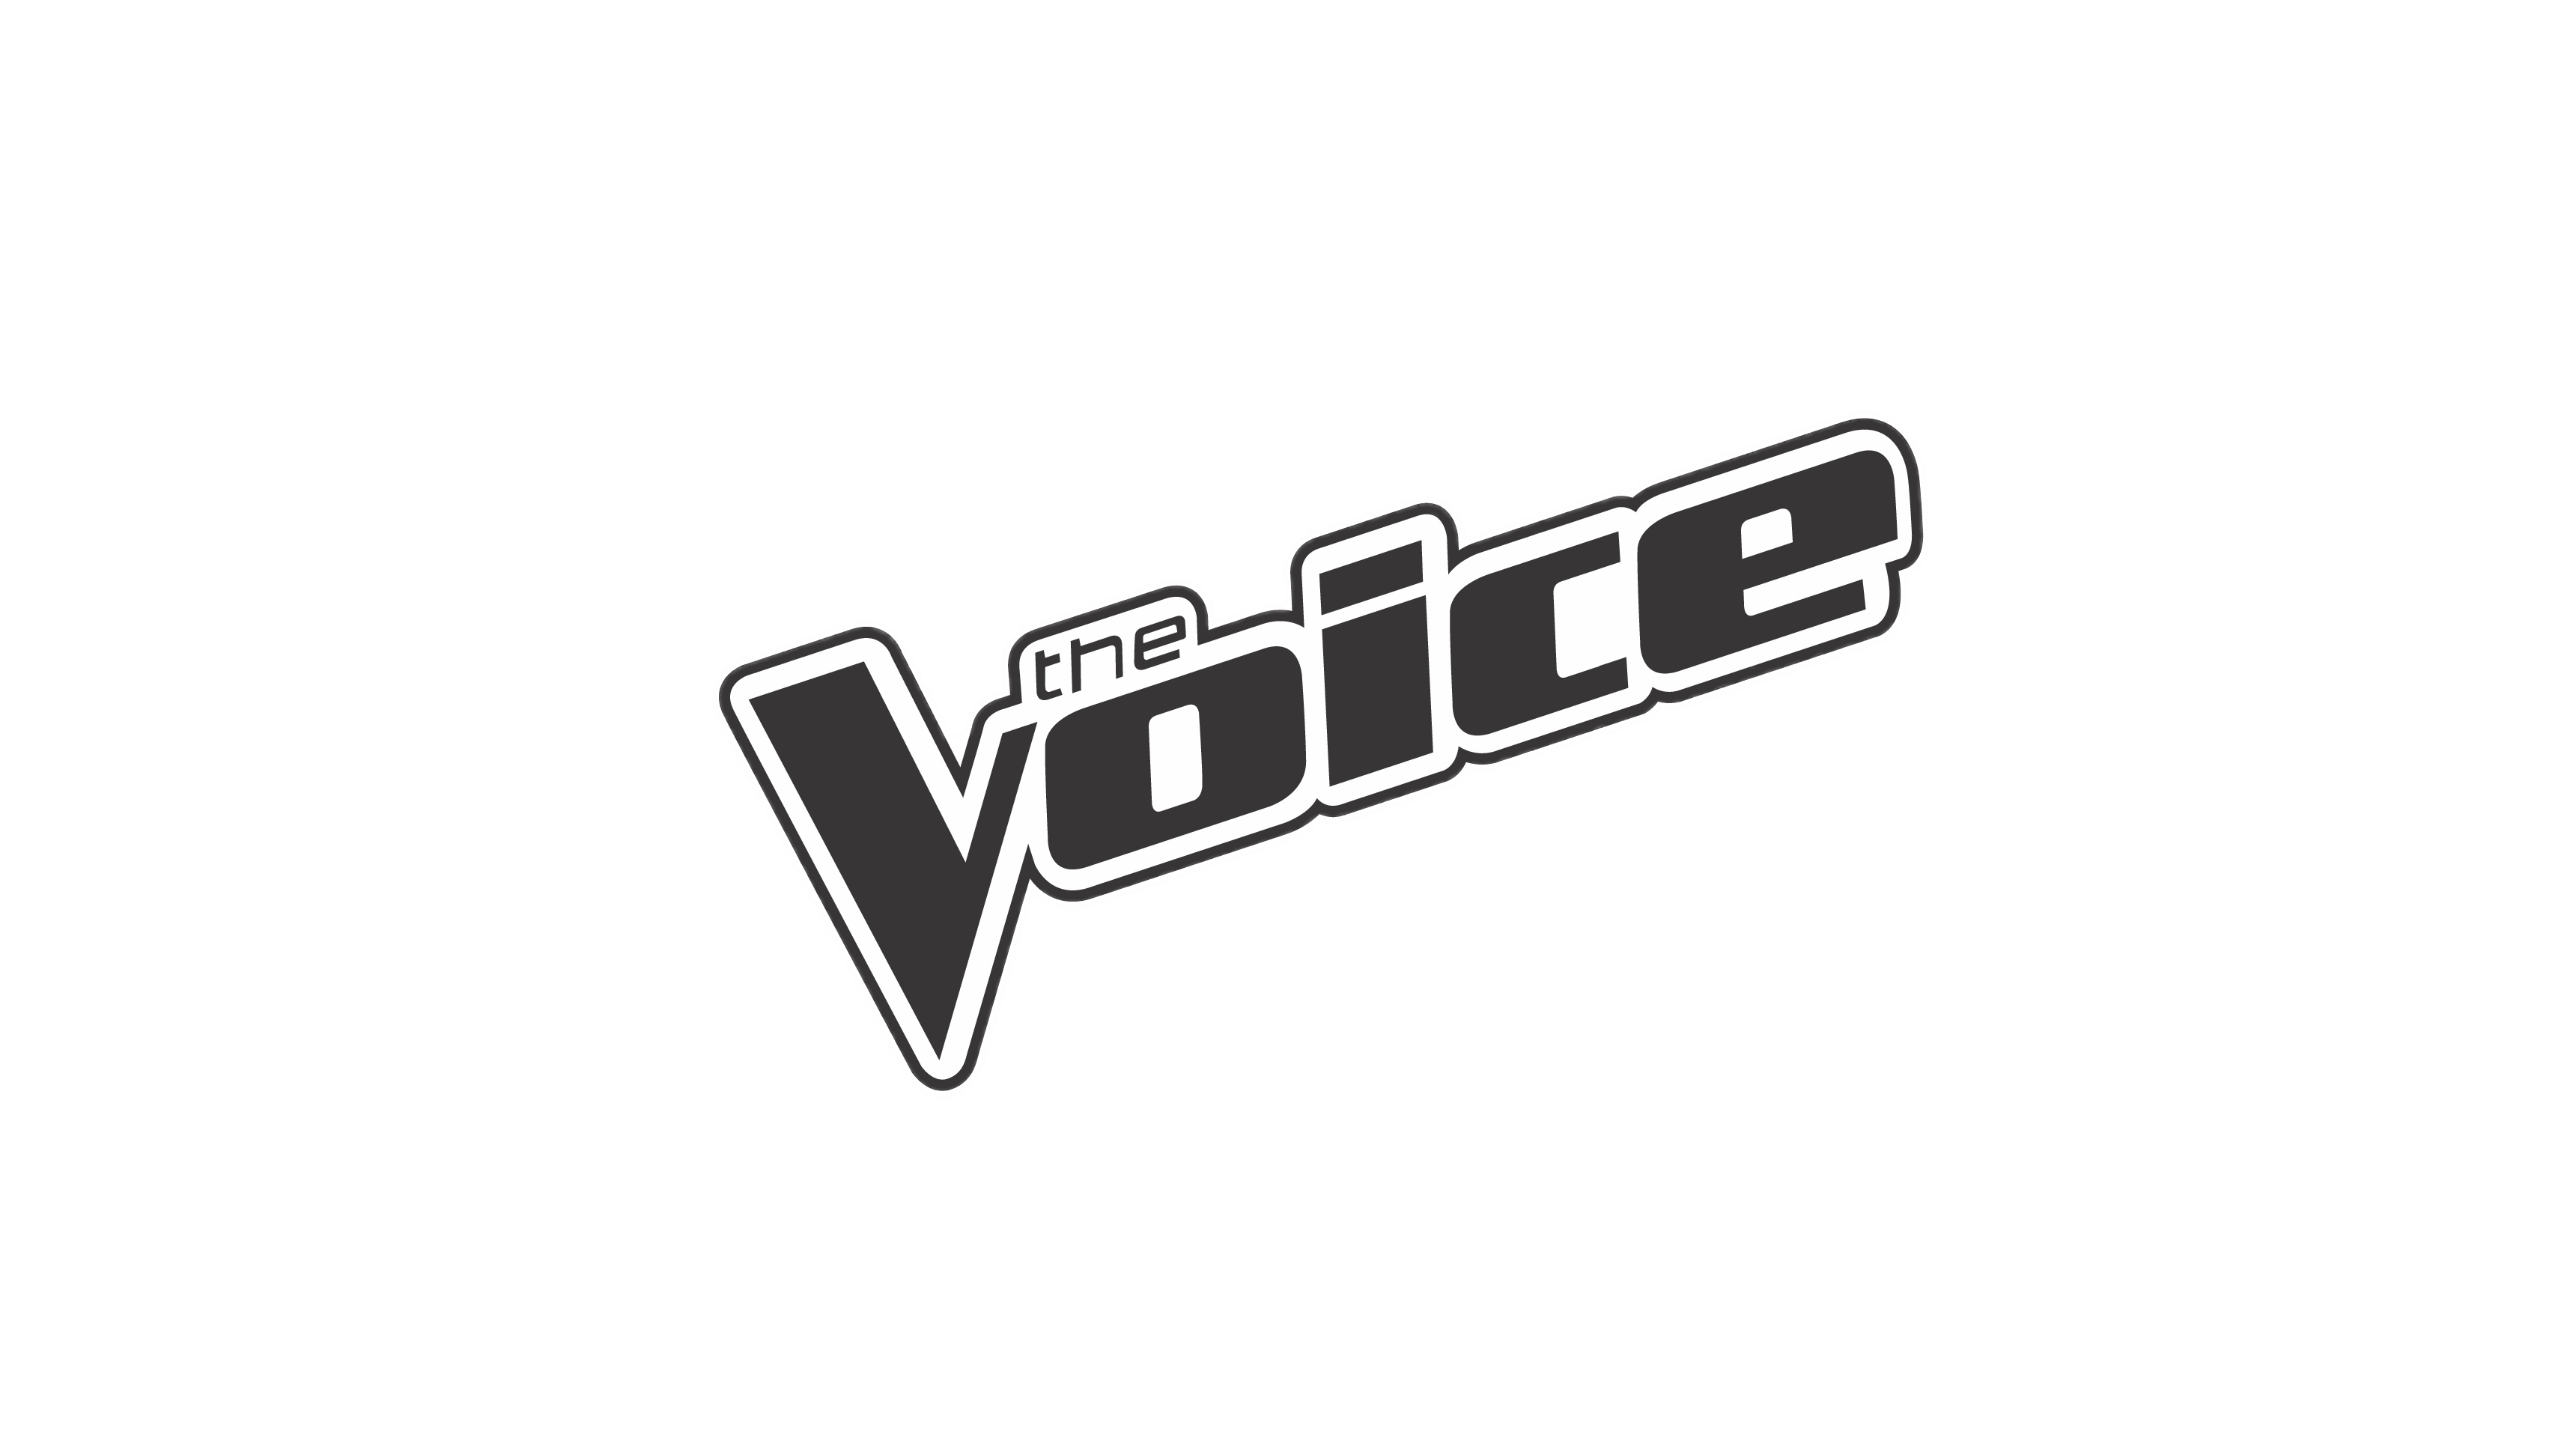 Google Voice Logo - The Voice Logo Black and White transparent PNG - StickPNG